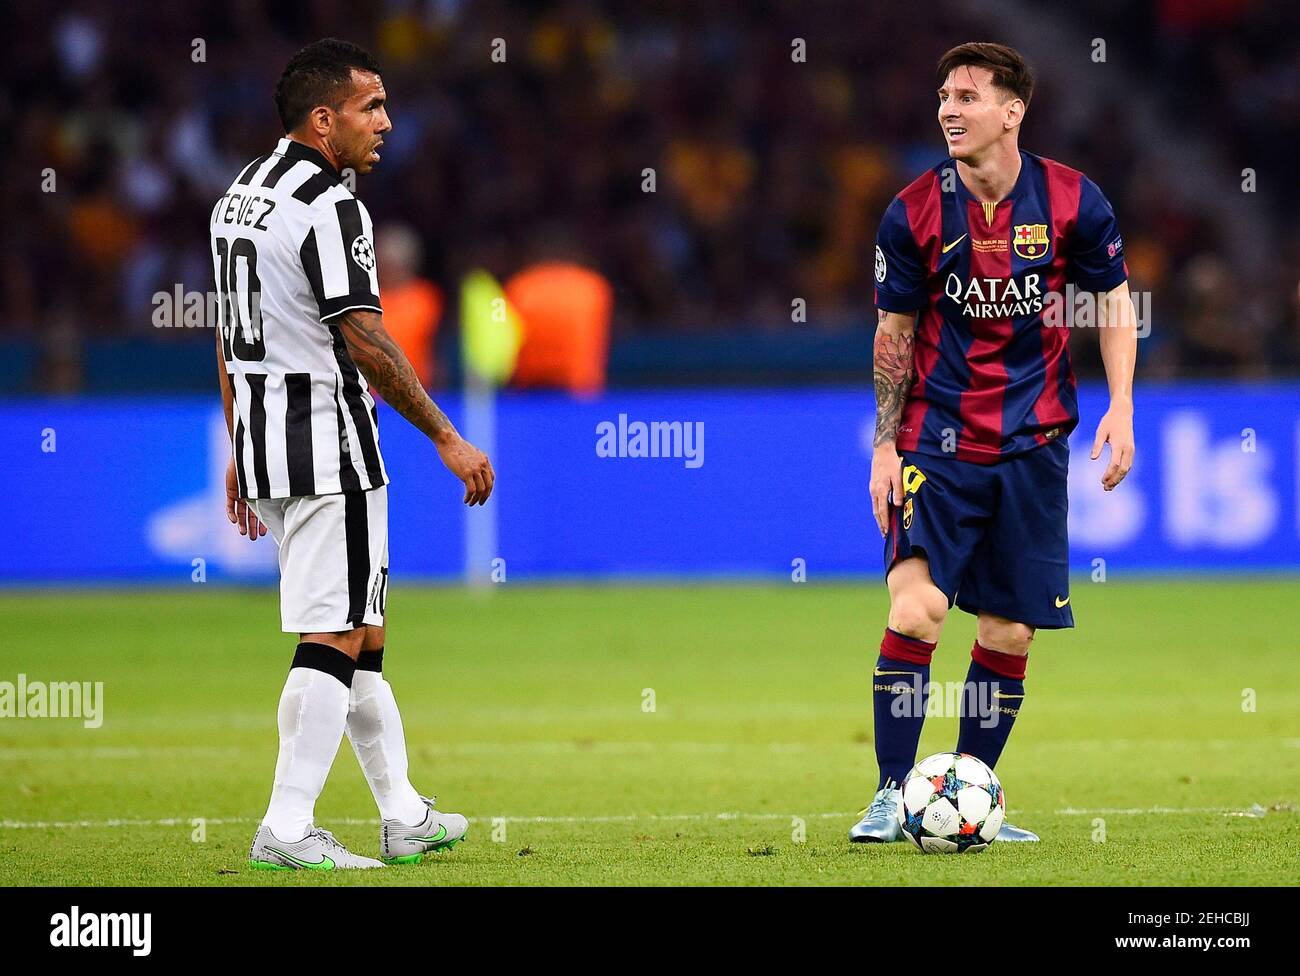 Football - FC Barcelona v Juventus - UEFA Champions League Final -  Olympiastadion, Berlin, Germany - 6/6/15 Barcelona's Lionel Messi and  Juventus' Carlos Tevez Reuters / Dylan Martinez Stock Photo - Alamy